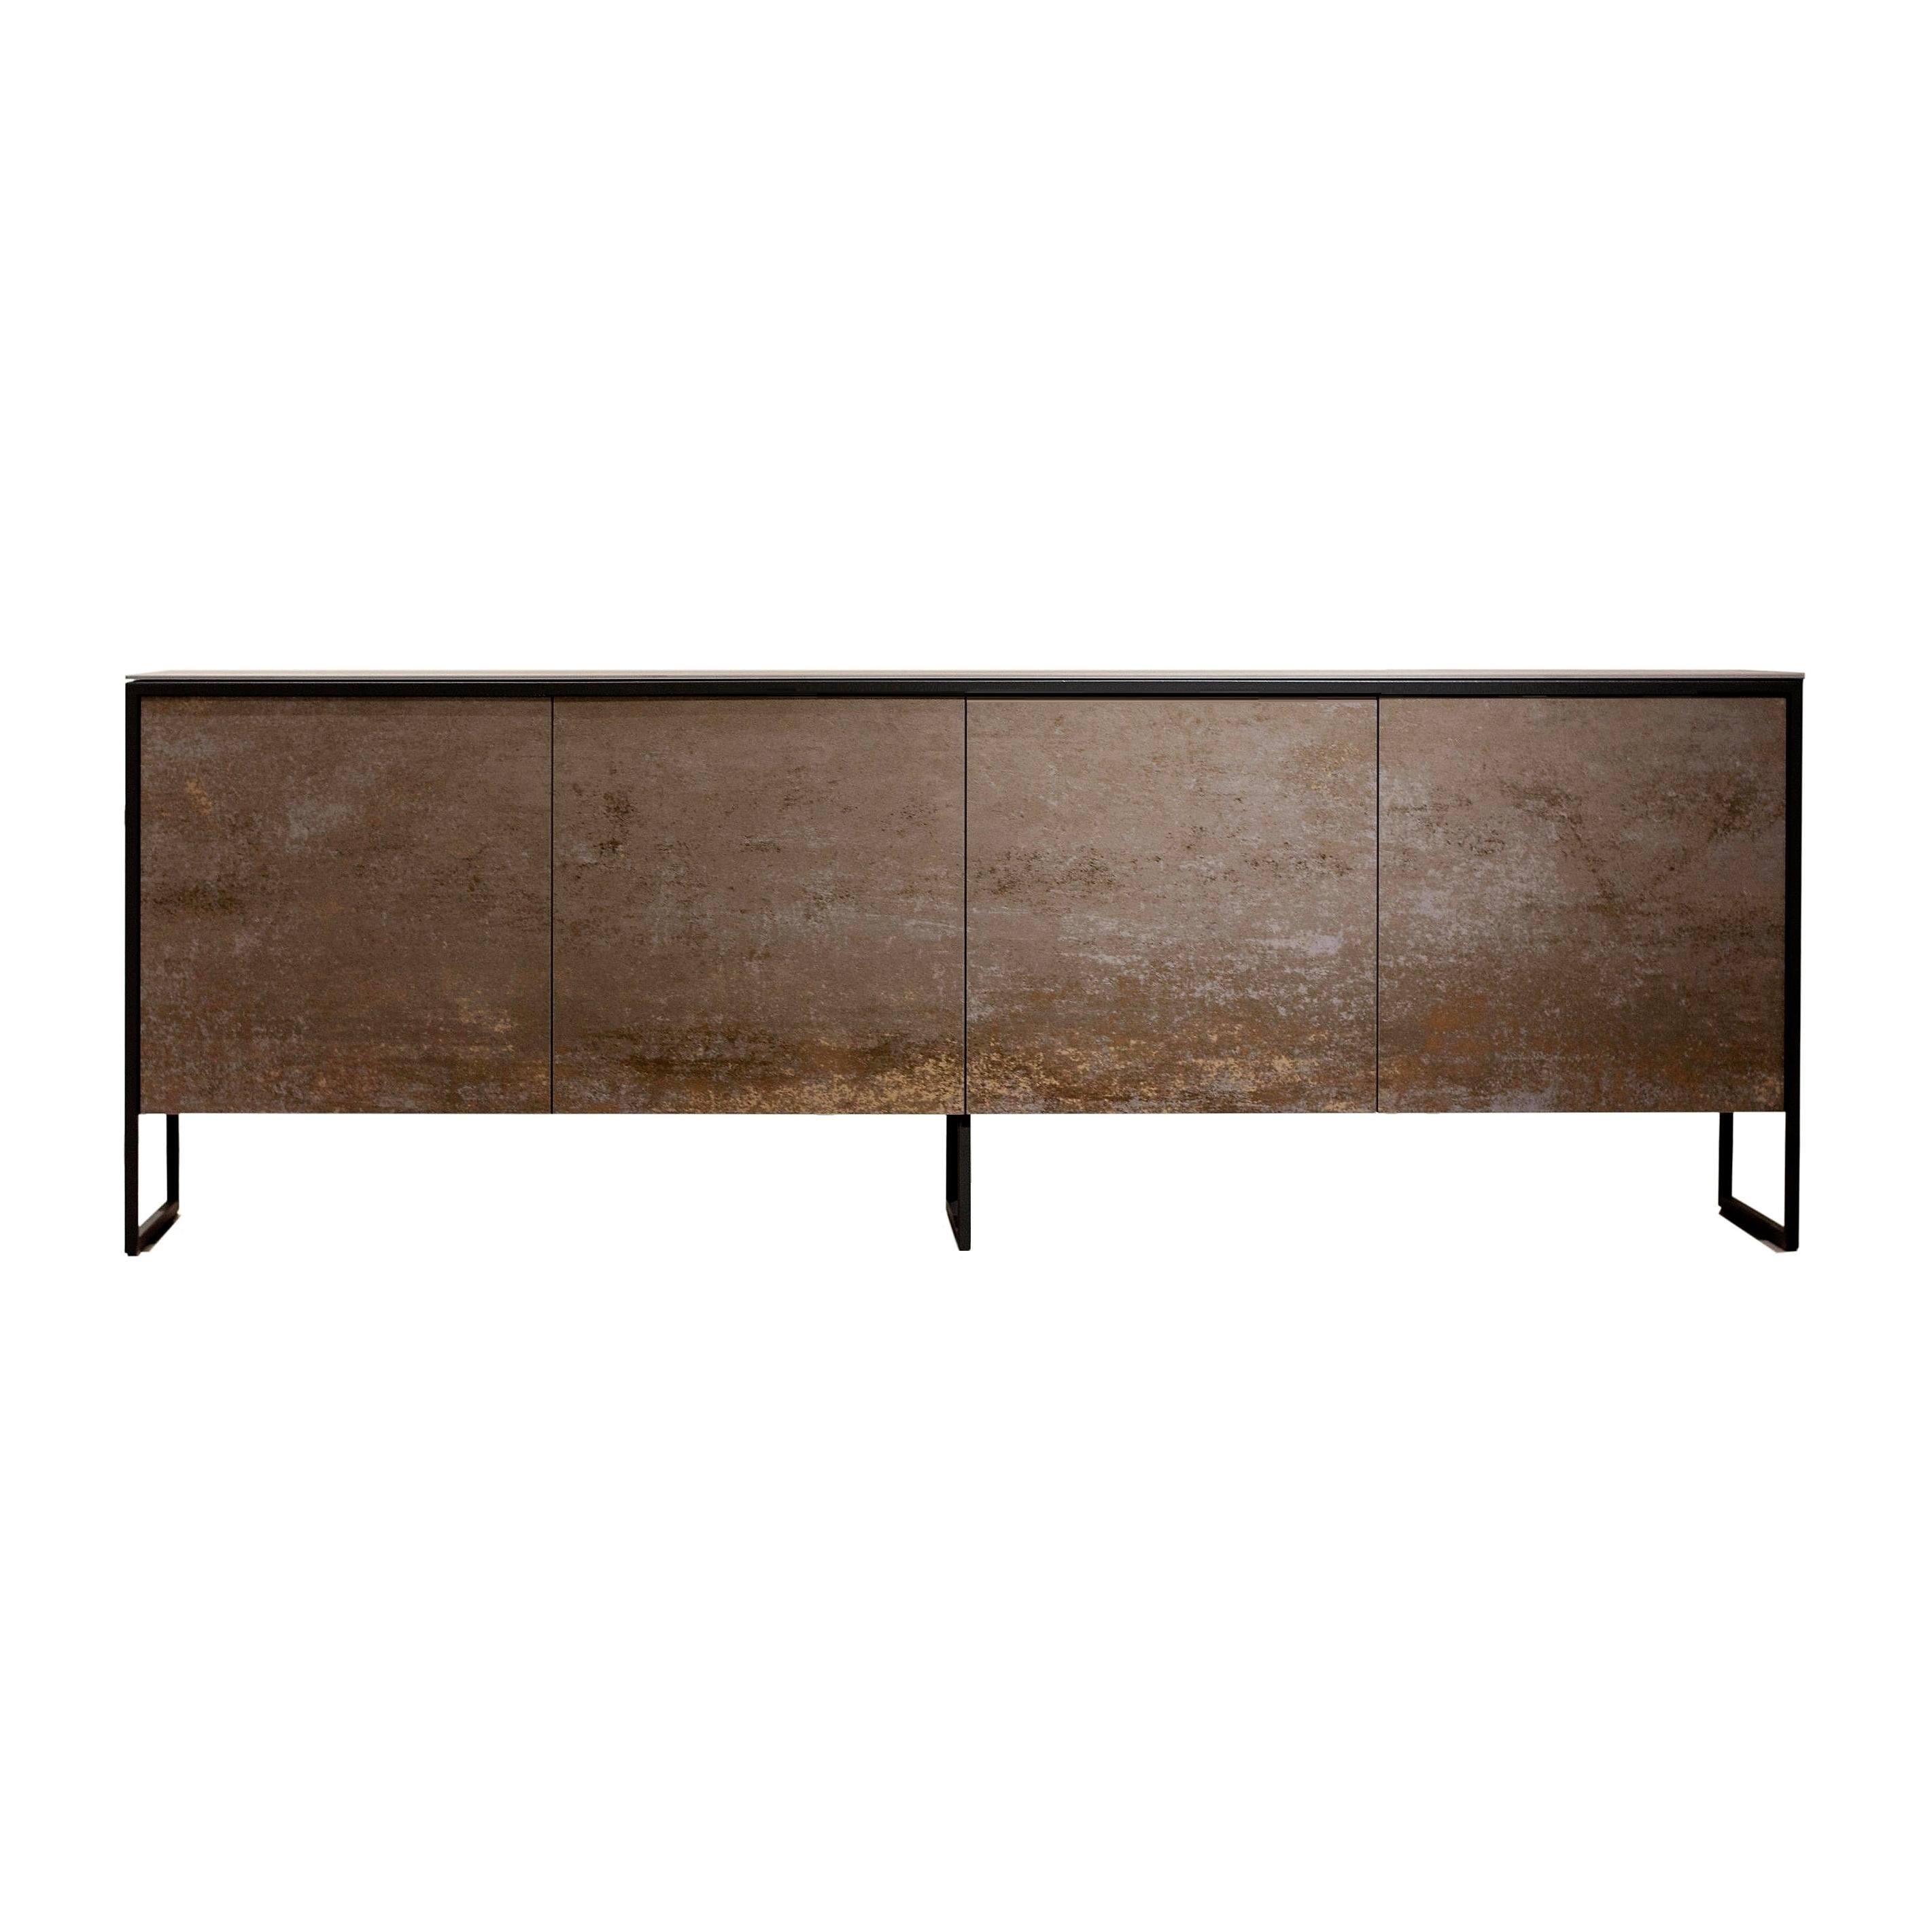 Bronze Ceramic Sideboard In Lacquered Stainless Steel Frame. For Sale